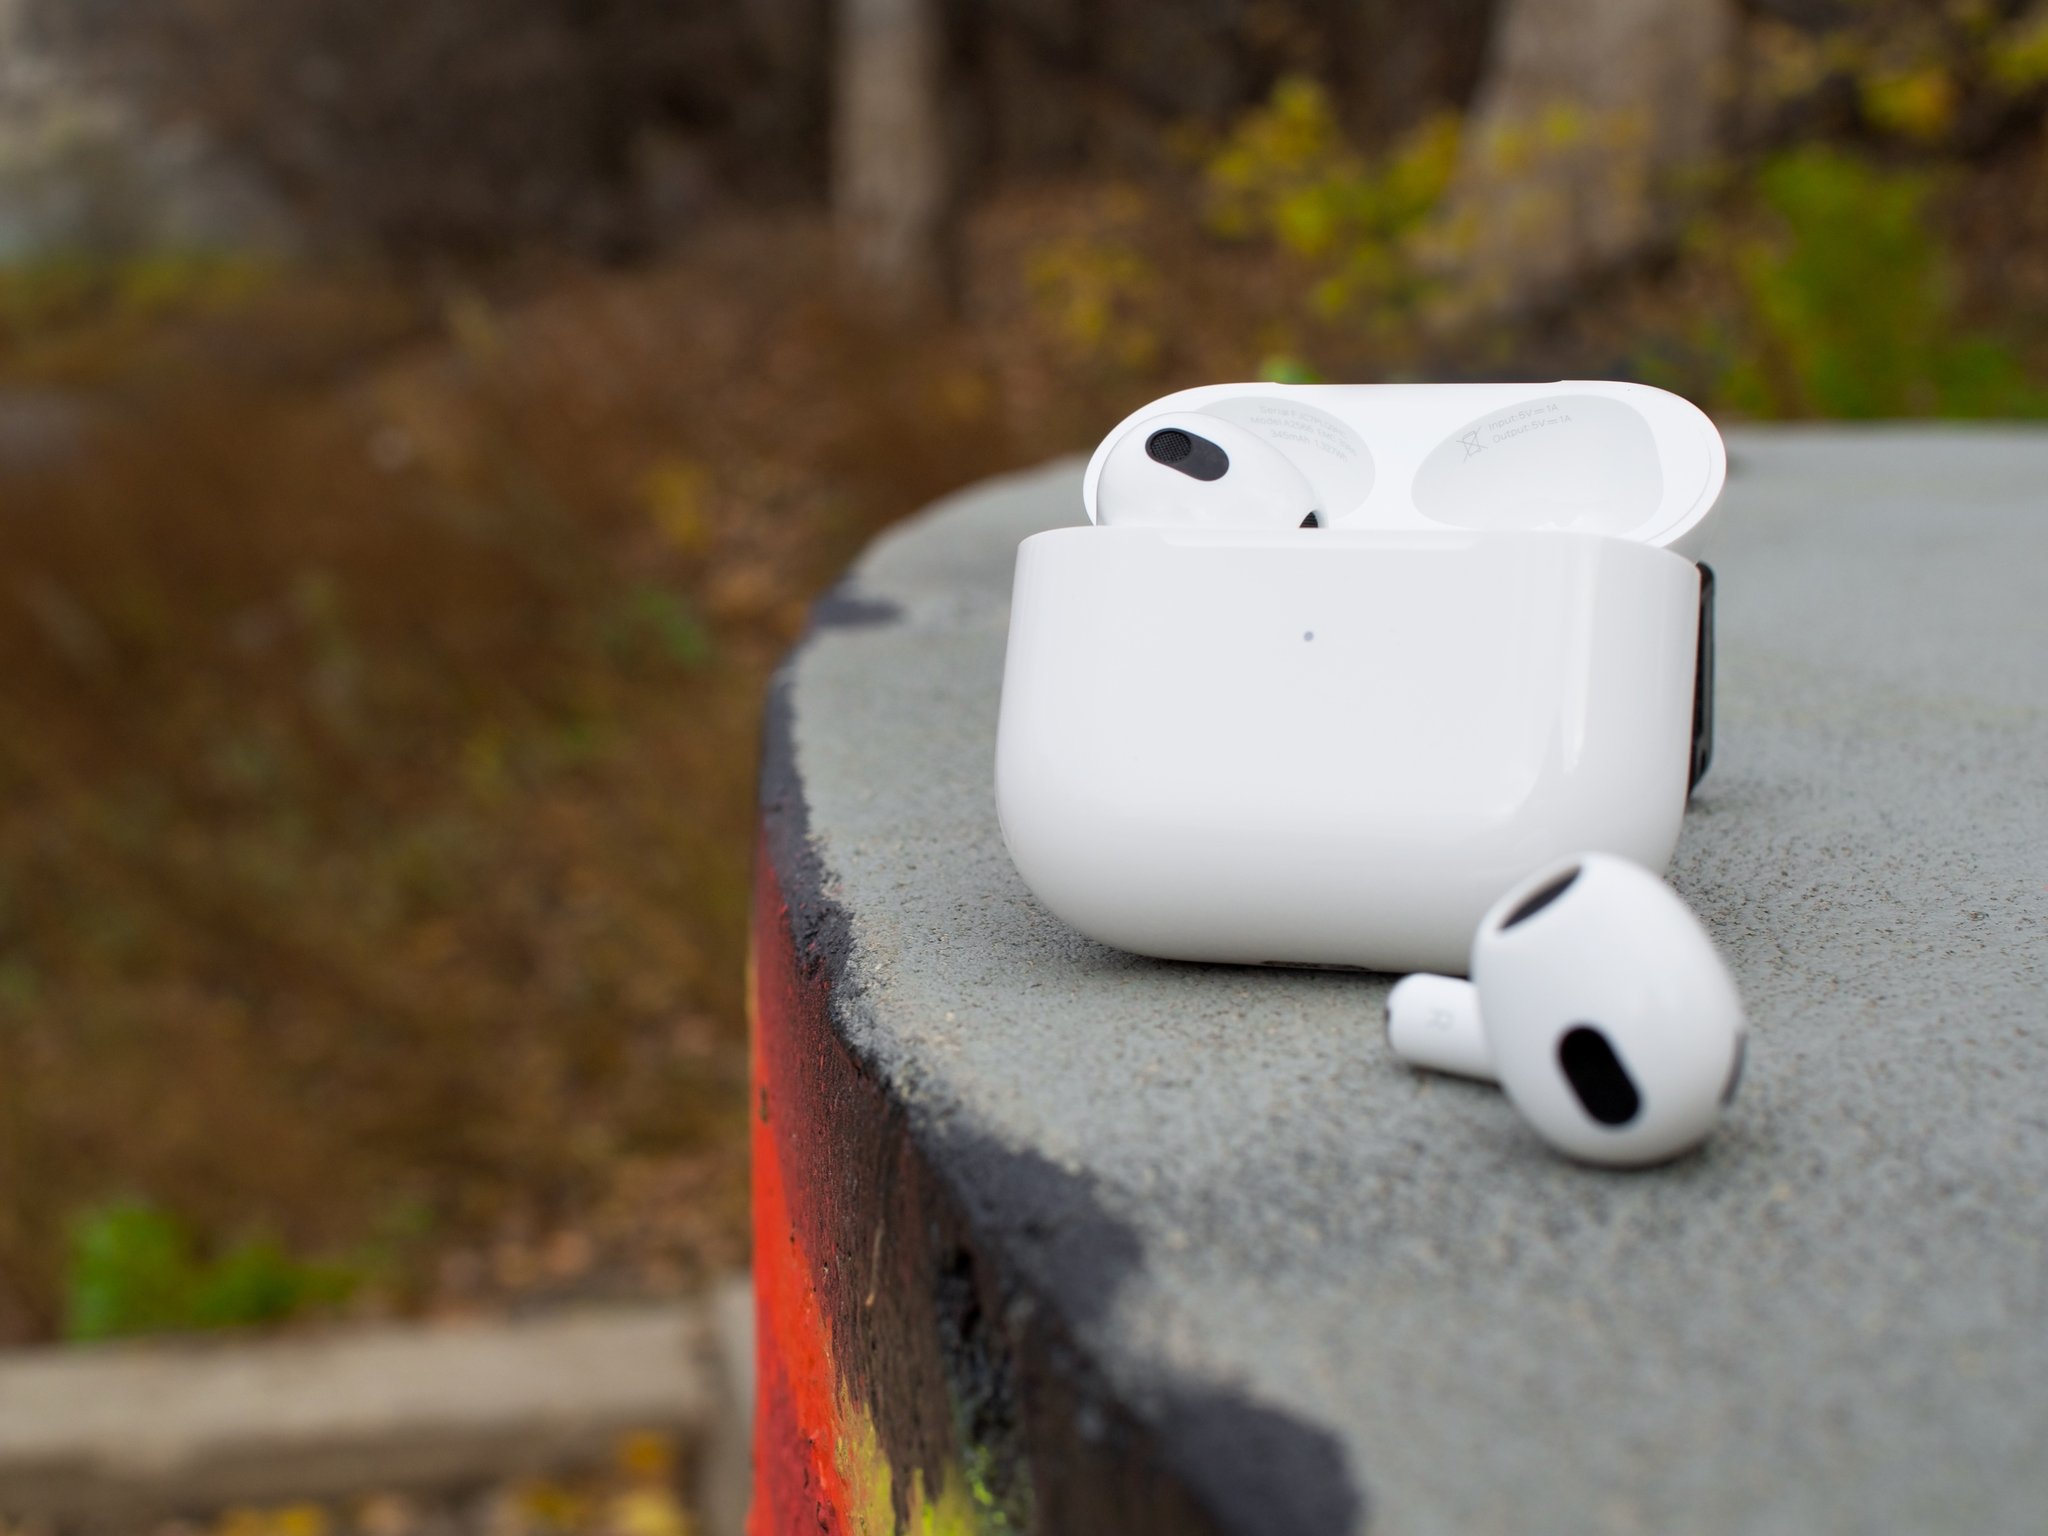 3rd generation airpods AirPods